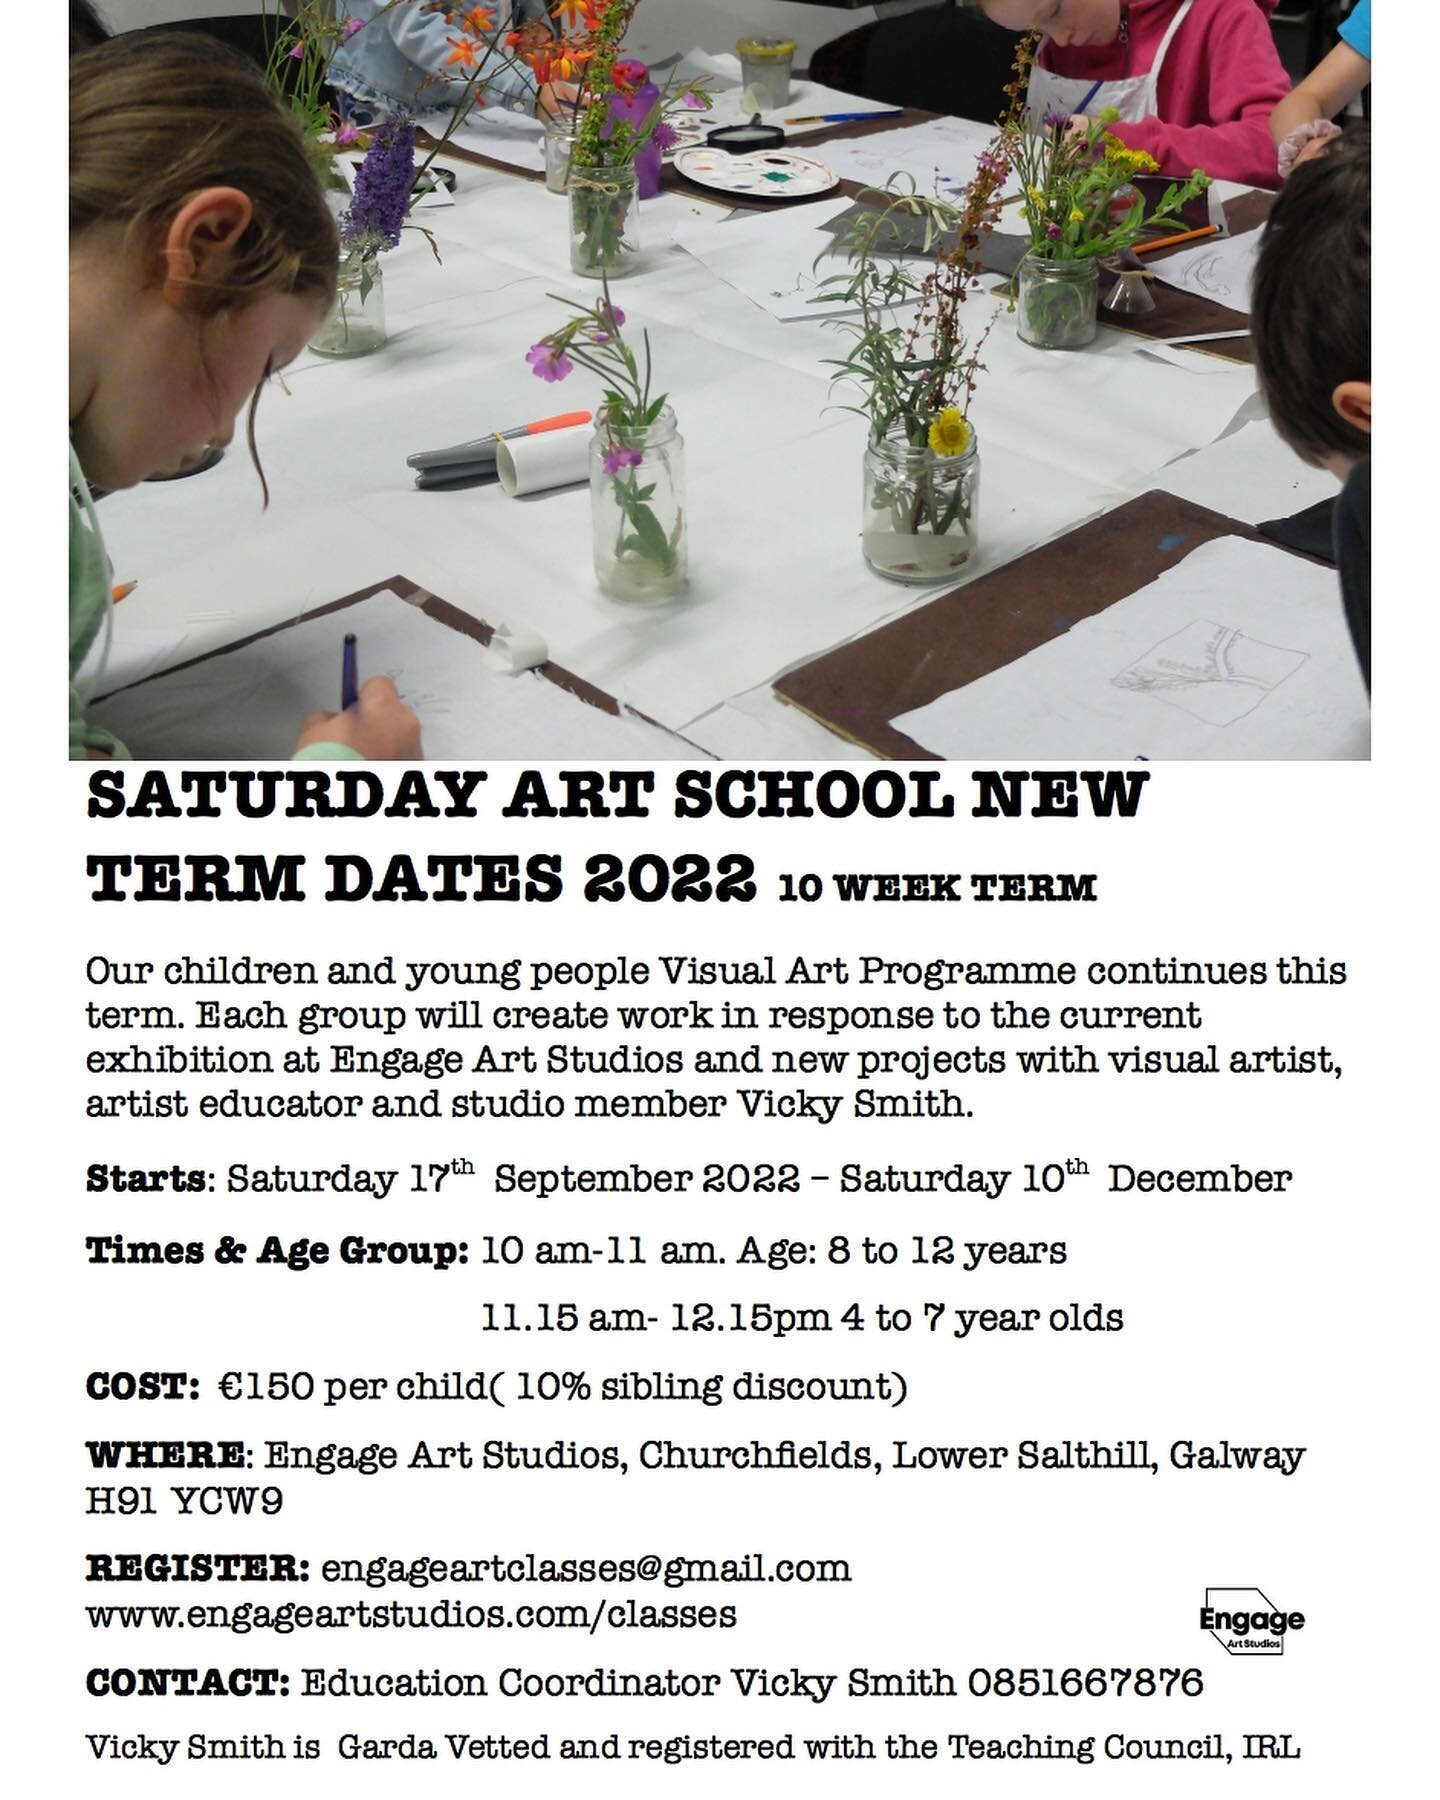 Engage Art Studios art workshops for children and adults starts this September with visual artist @vickysmith.ie and @tadhg.o 
Register: www.engageartstudios.com/classes
Enquiries: Education Coordinator 0851667678.
Email:engageartclasses@gmail.com

.